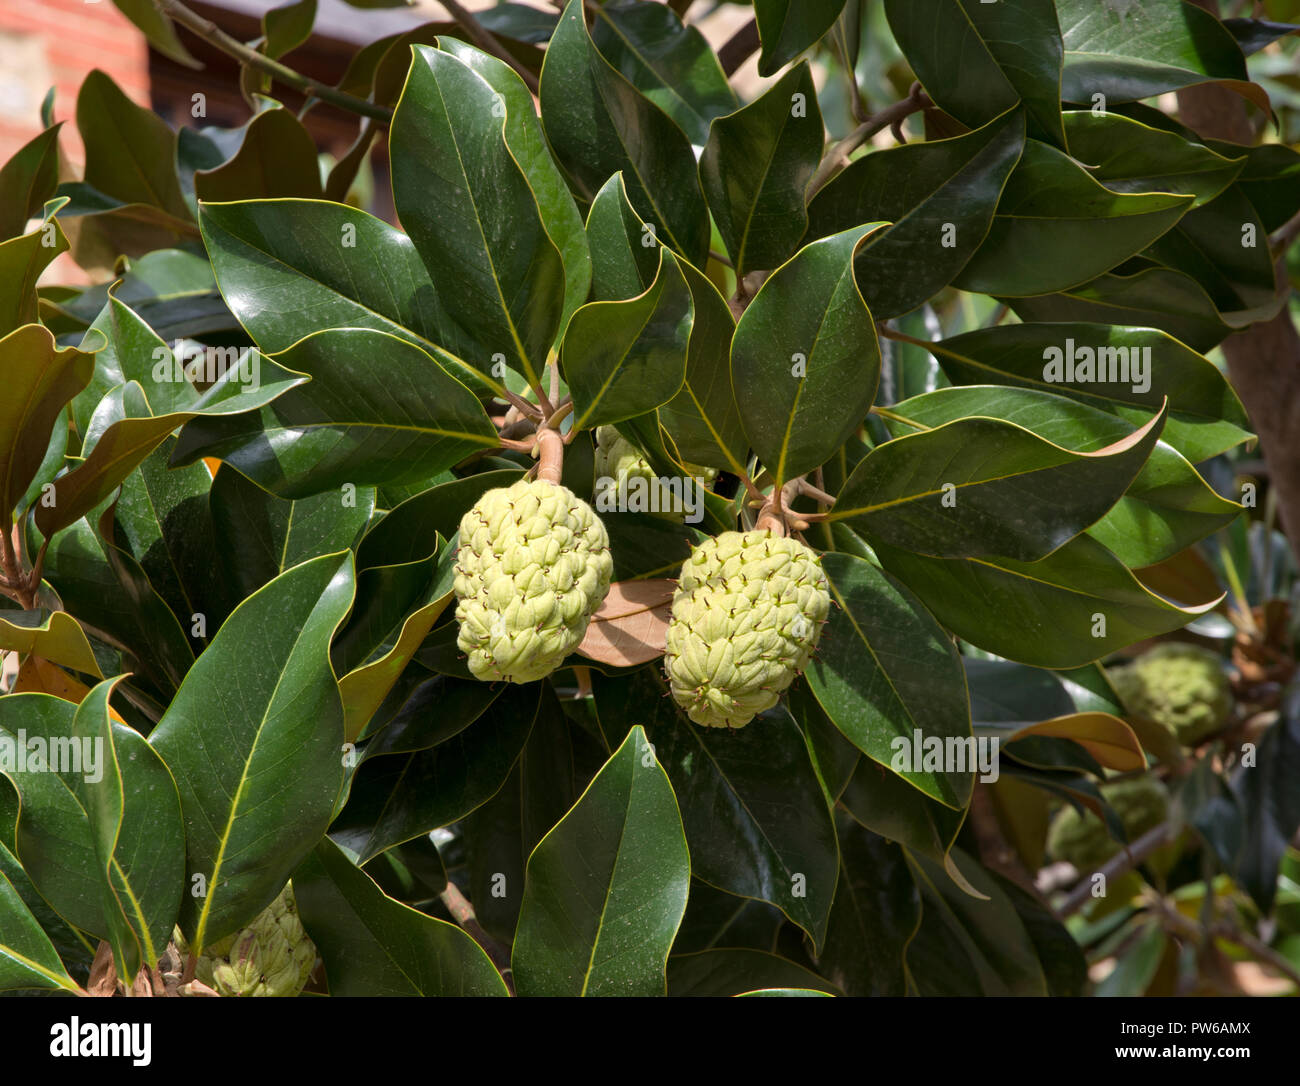 Magnolia seed pods in Argeles, France Stock Photo